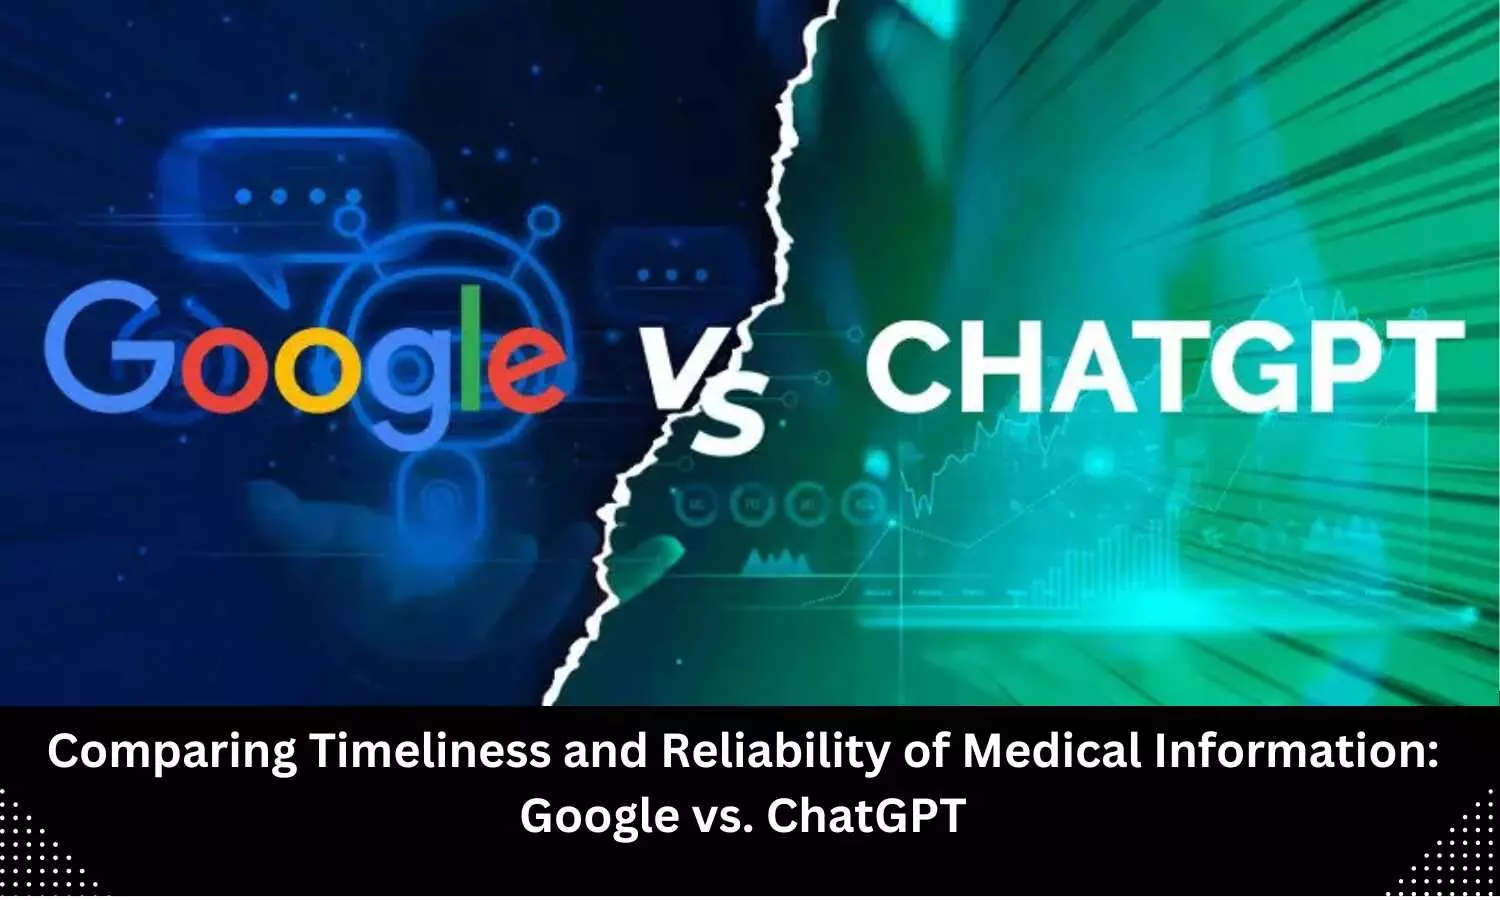 Comparing timeliness and reliability of medical information: Google vs ChatGPT